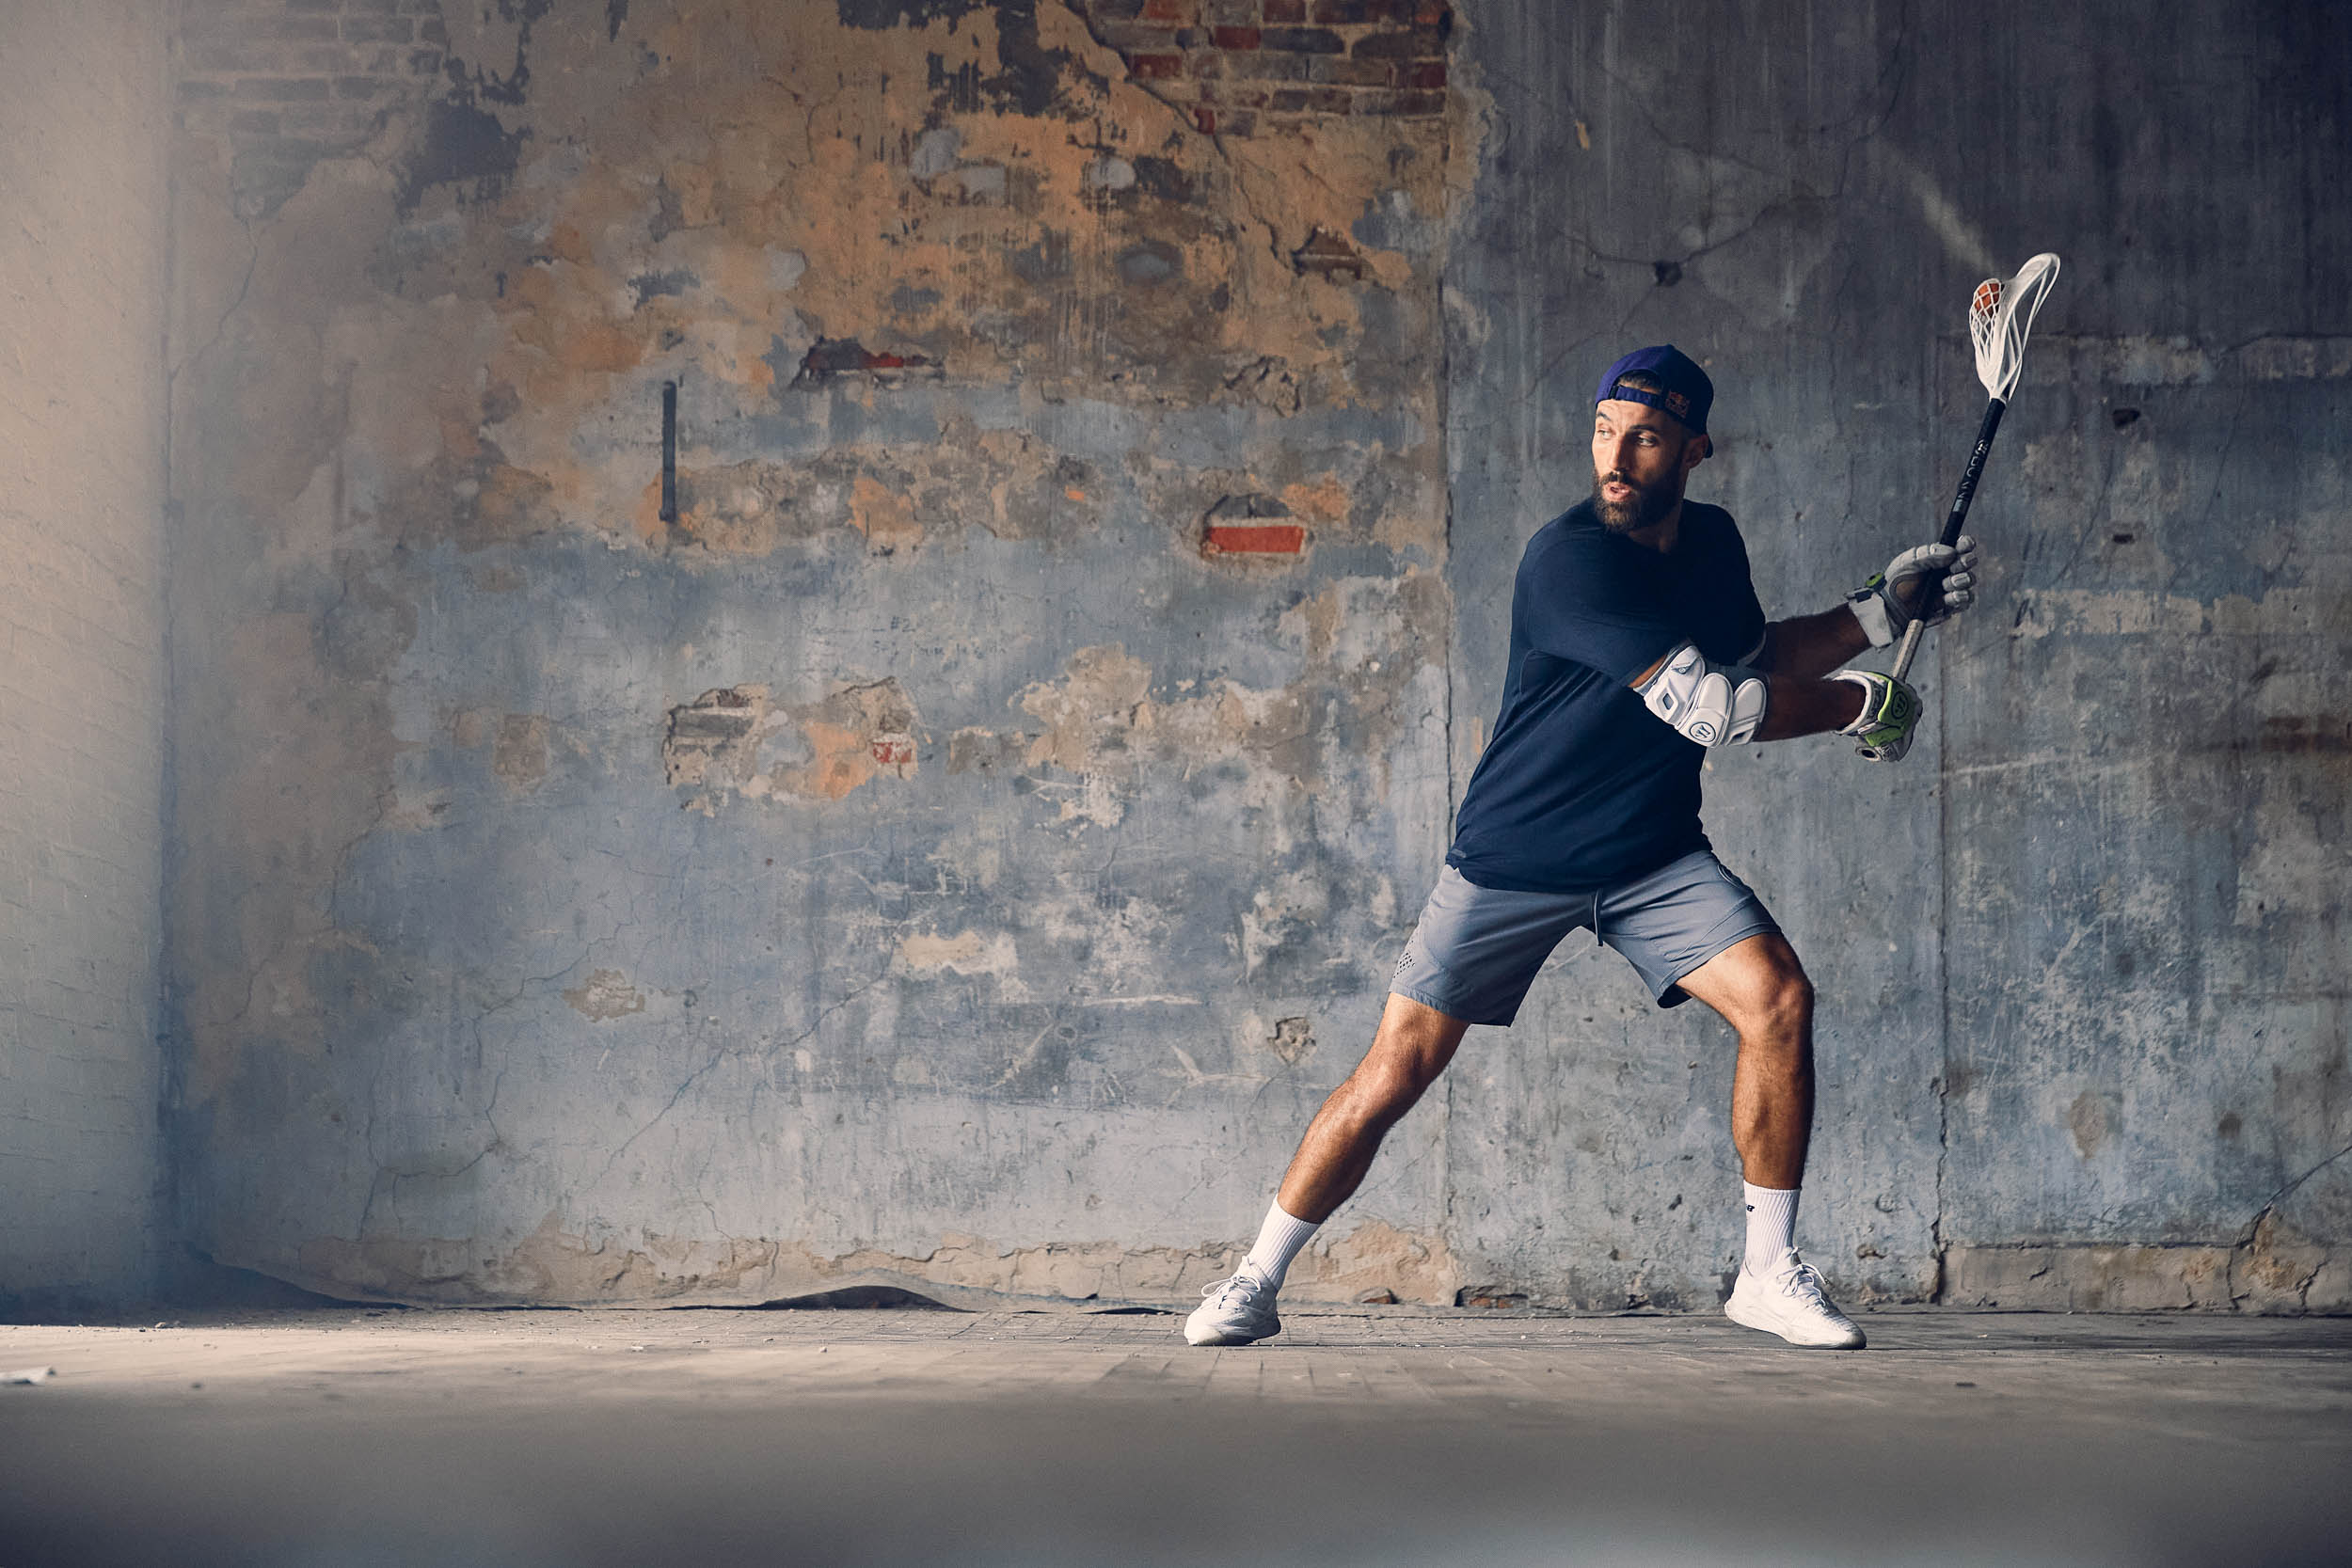 RED BULL ACTION SPORTS PHOTOGRAPHY OF WORLD CHAMPION LACROSSE ATHLETE PAUL RABIL FOUNDER OF PREMIERE LACROSSE LEAGUE BY COMMERCIAL SPORTS ADVERTISING PHOTOGRAPHER SHAWN HUBBARD